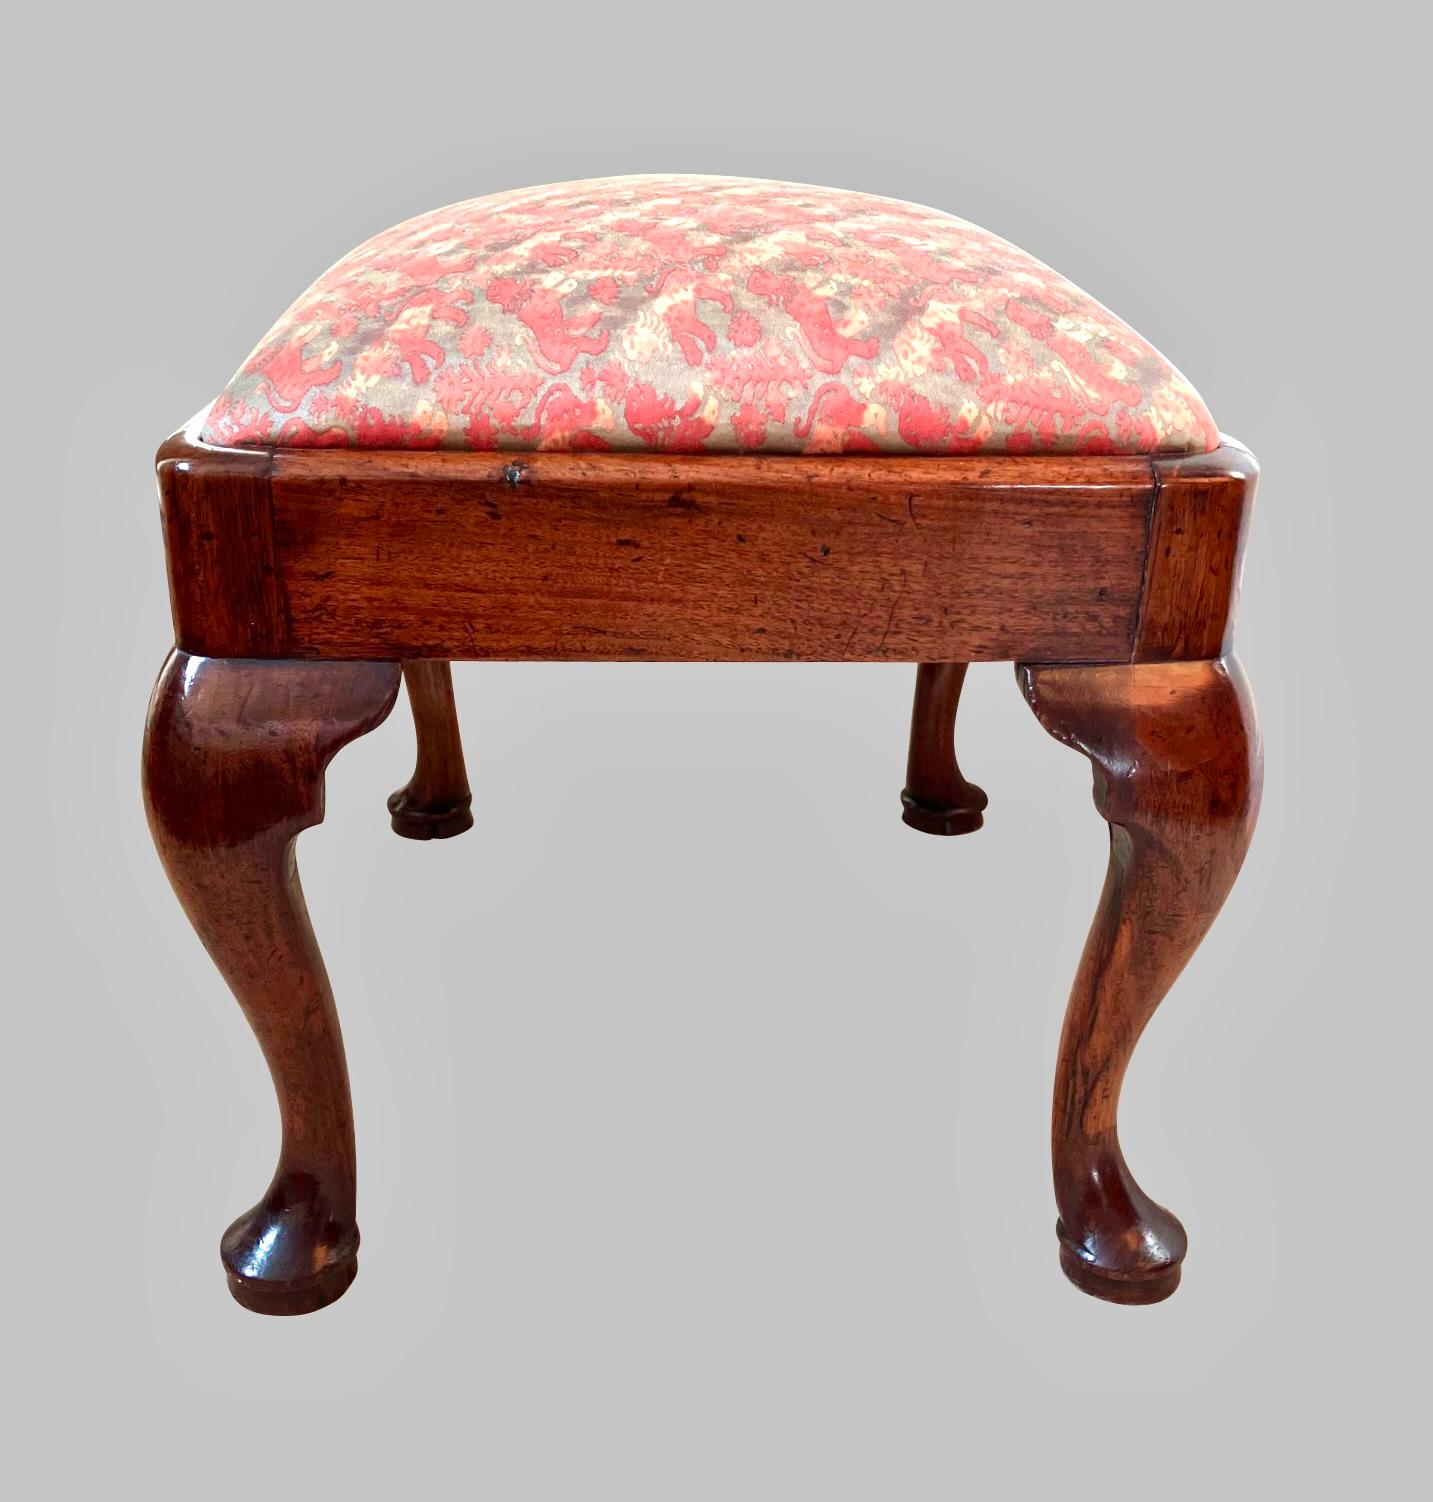 18th Century English George I Period Small Bench Now Upholstered in Fortuny Fabric  For Sale